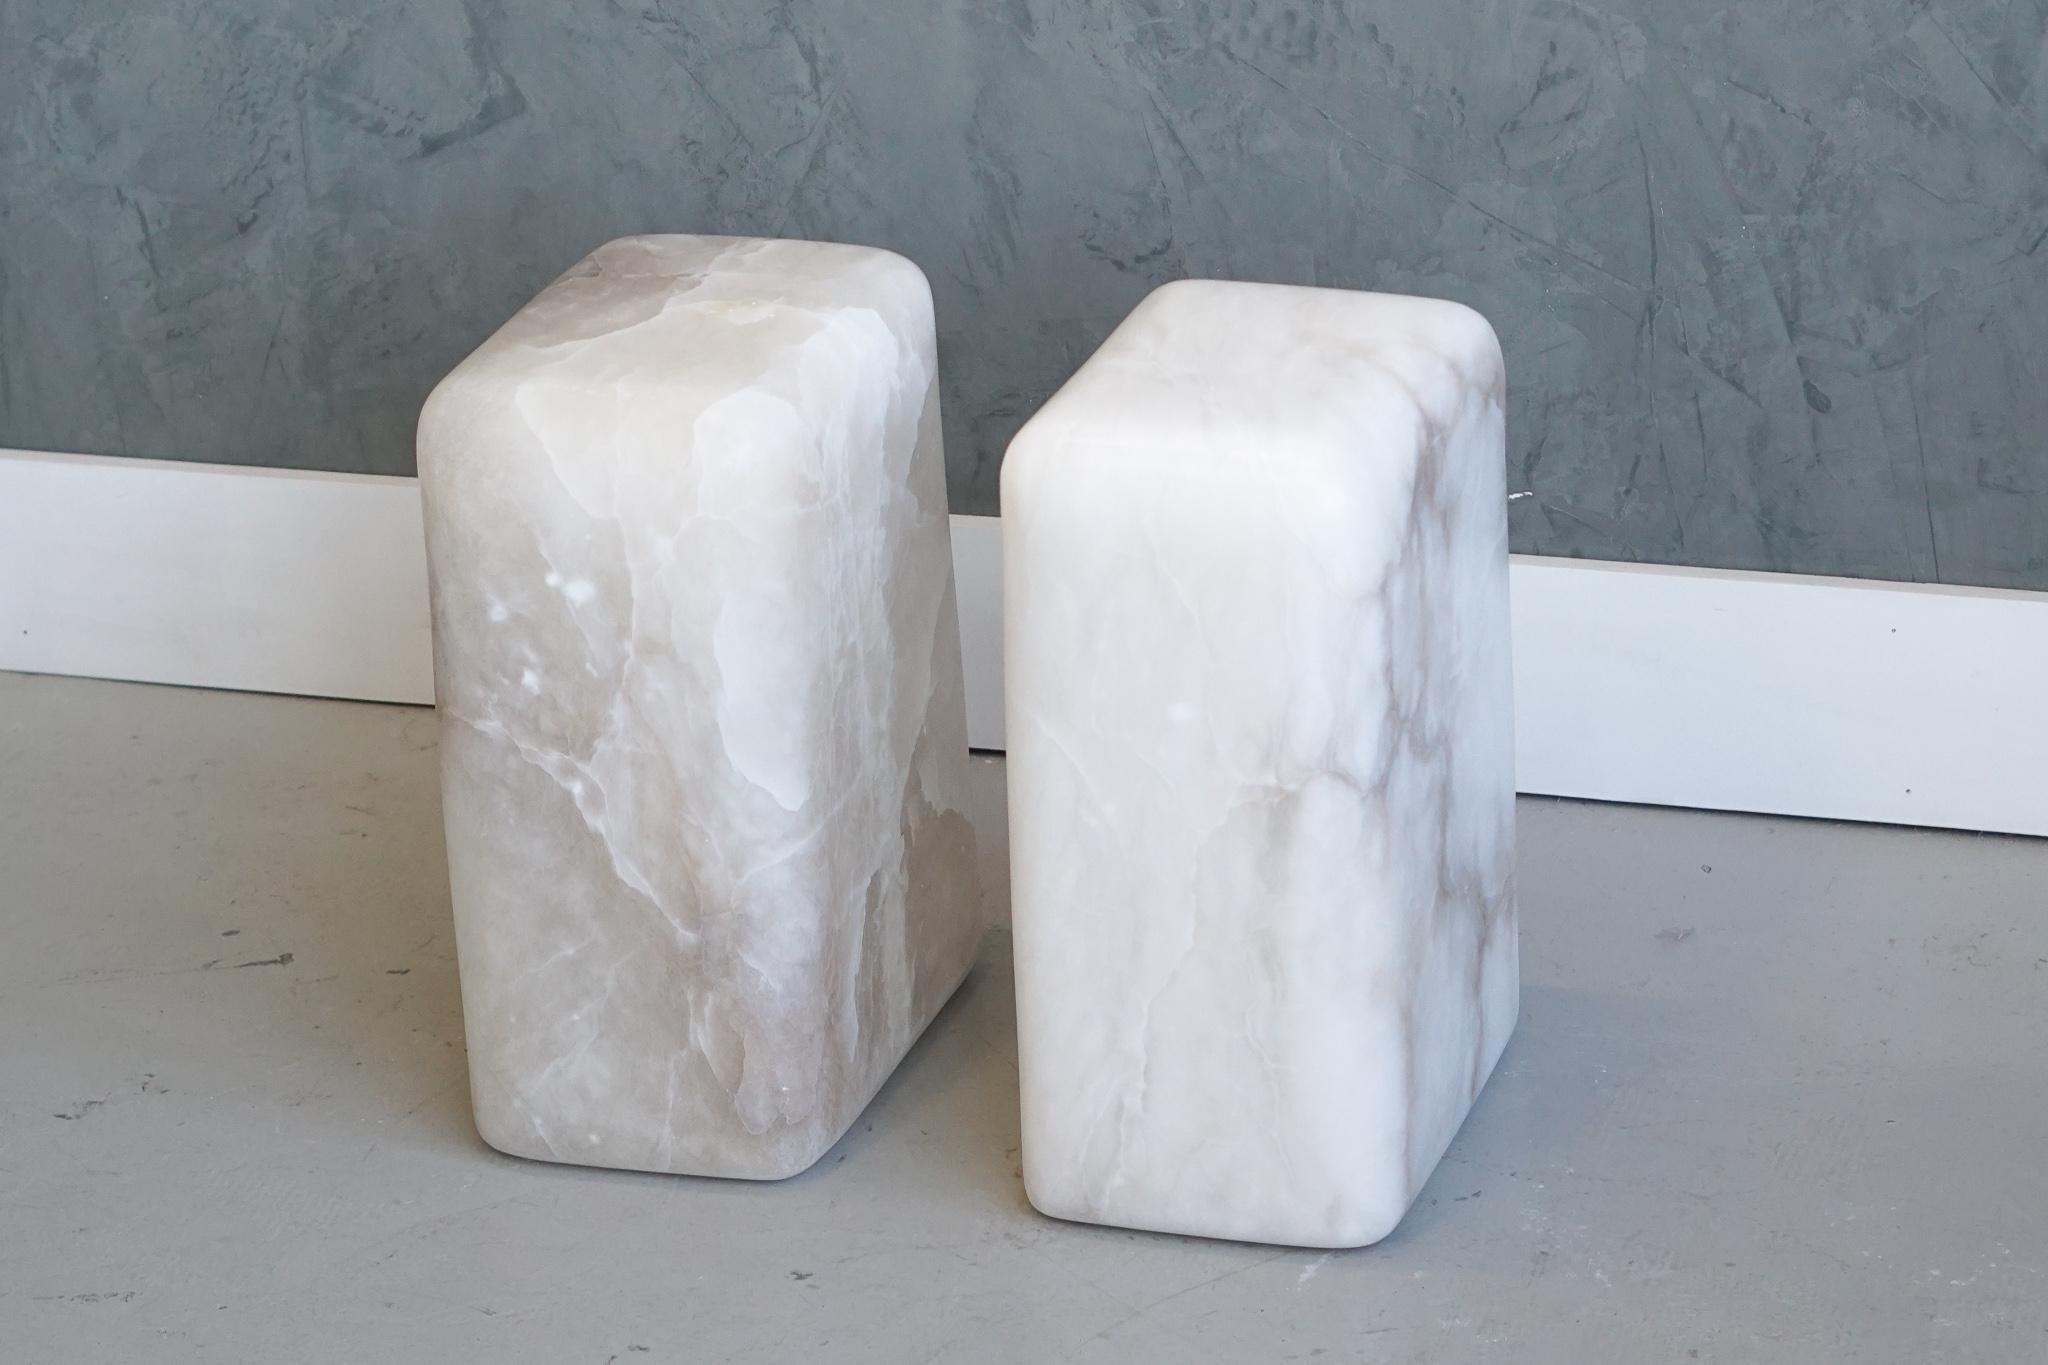 These side or end tables have been hand shaped from a solid block of white alabaster. The unique coloration and veining in the blocks are the focal point of this simple yet captivating piece. 

Alabaster color / veining will vary from piece to